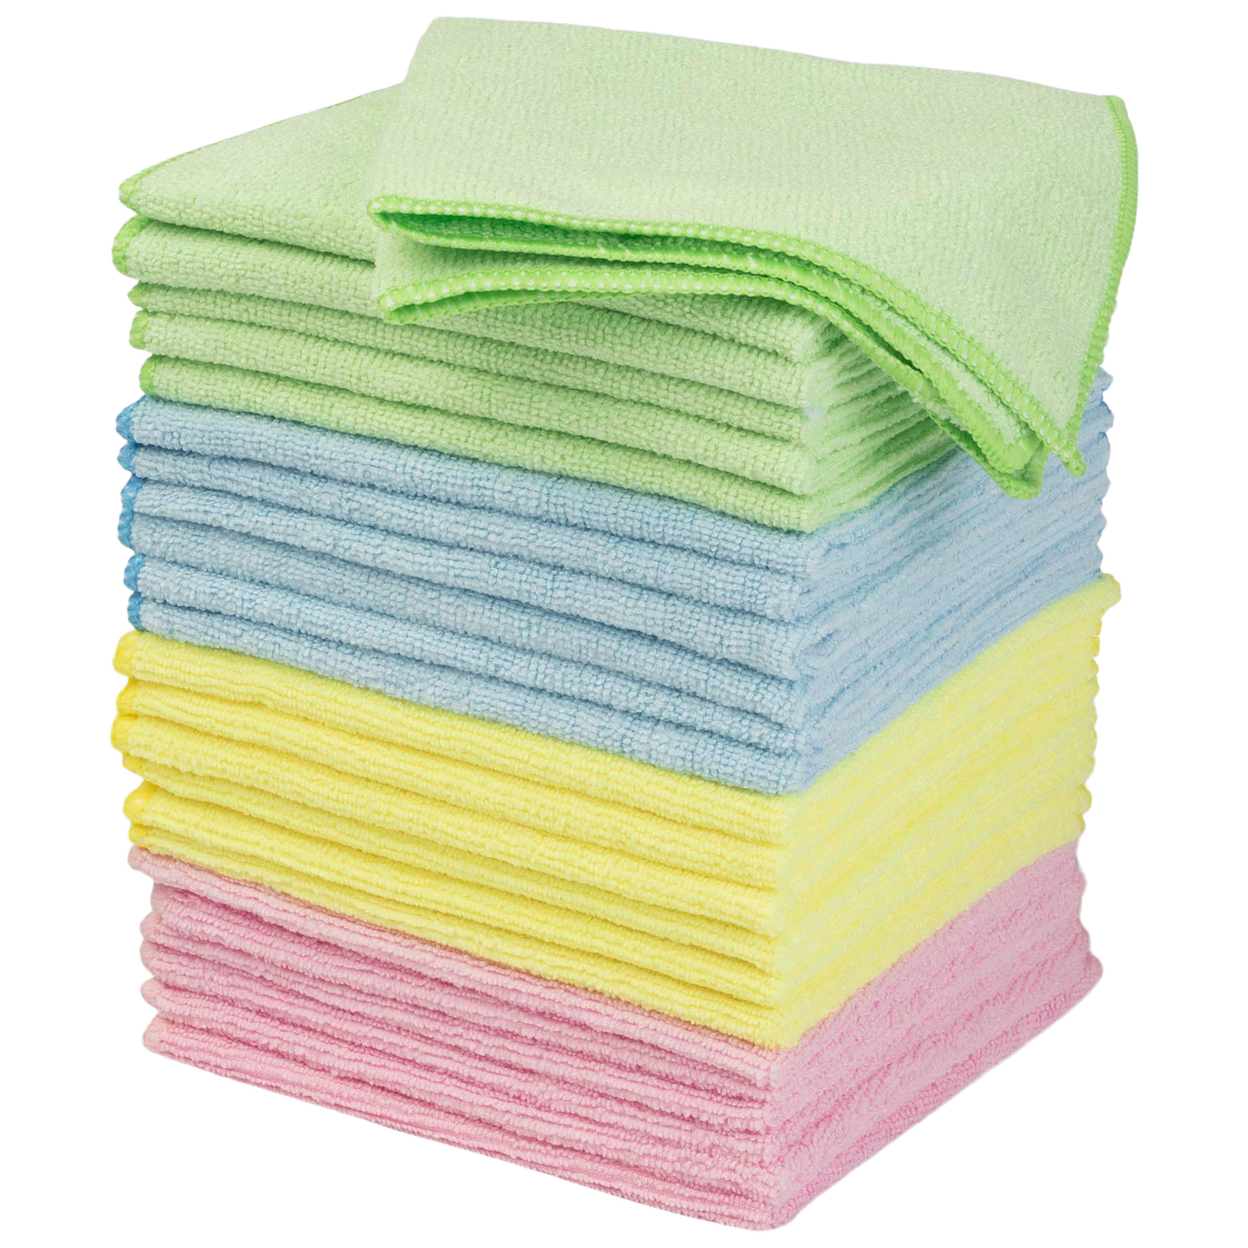 Microfiber Cleaning Cloth Set 24pack Microfiber Towels 12.6in Cleaning Rags